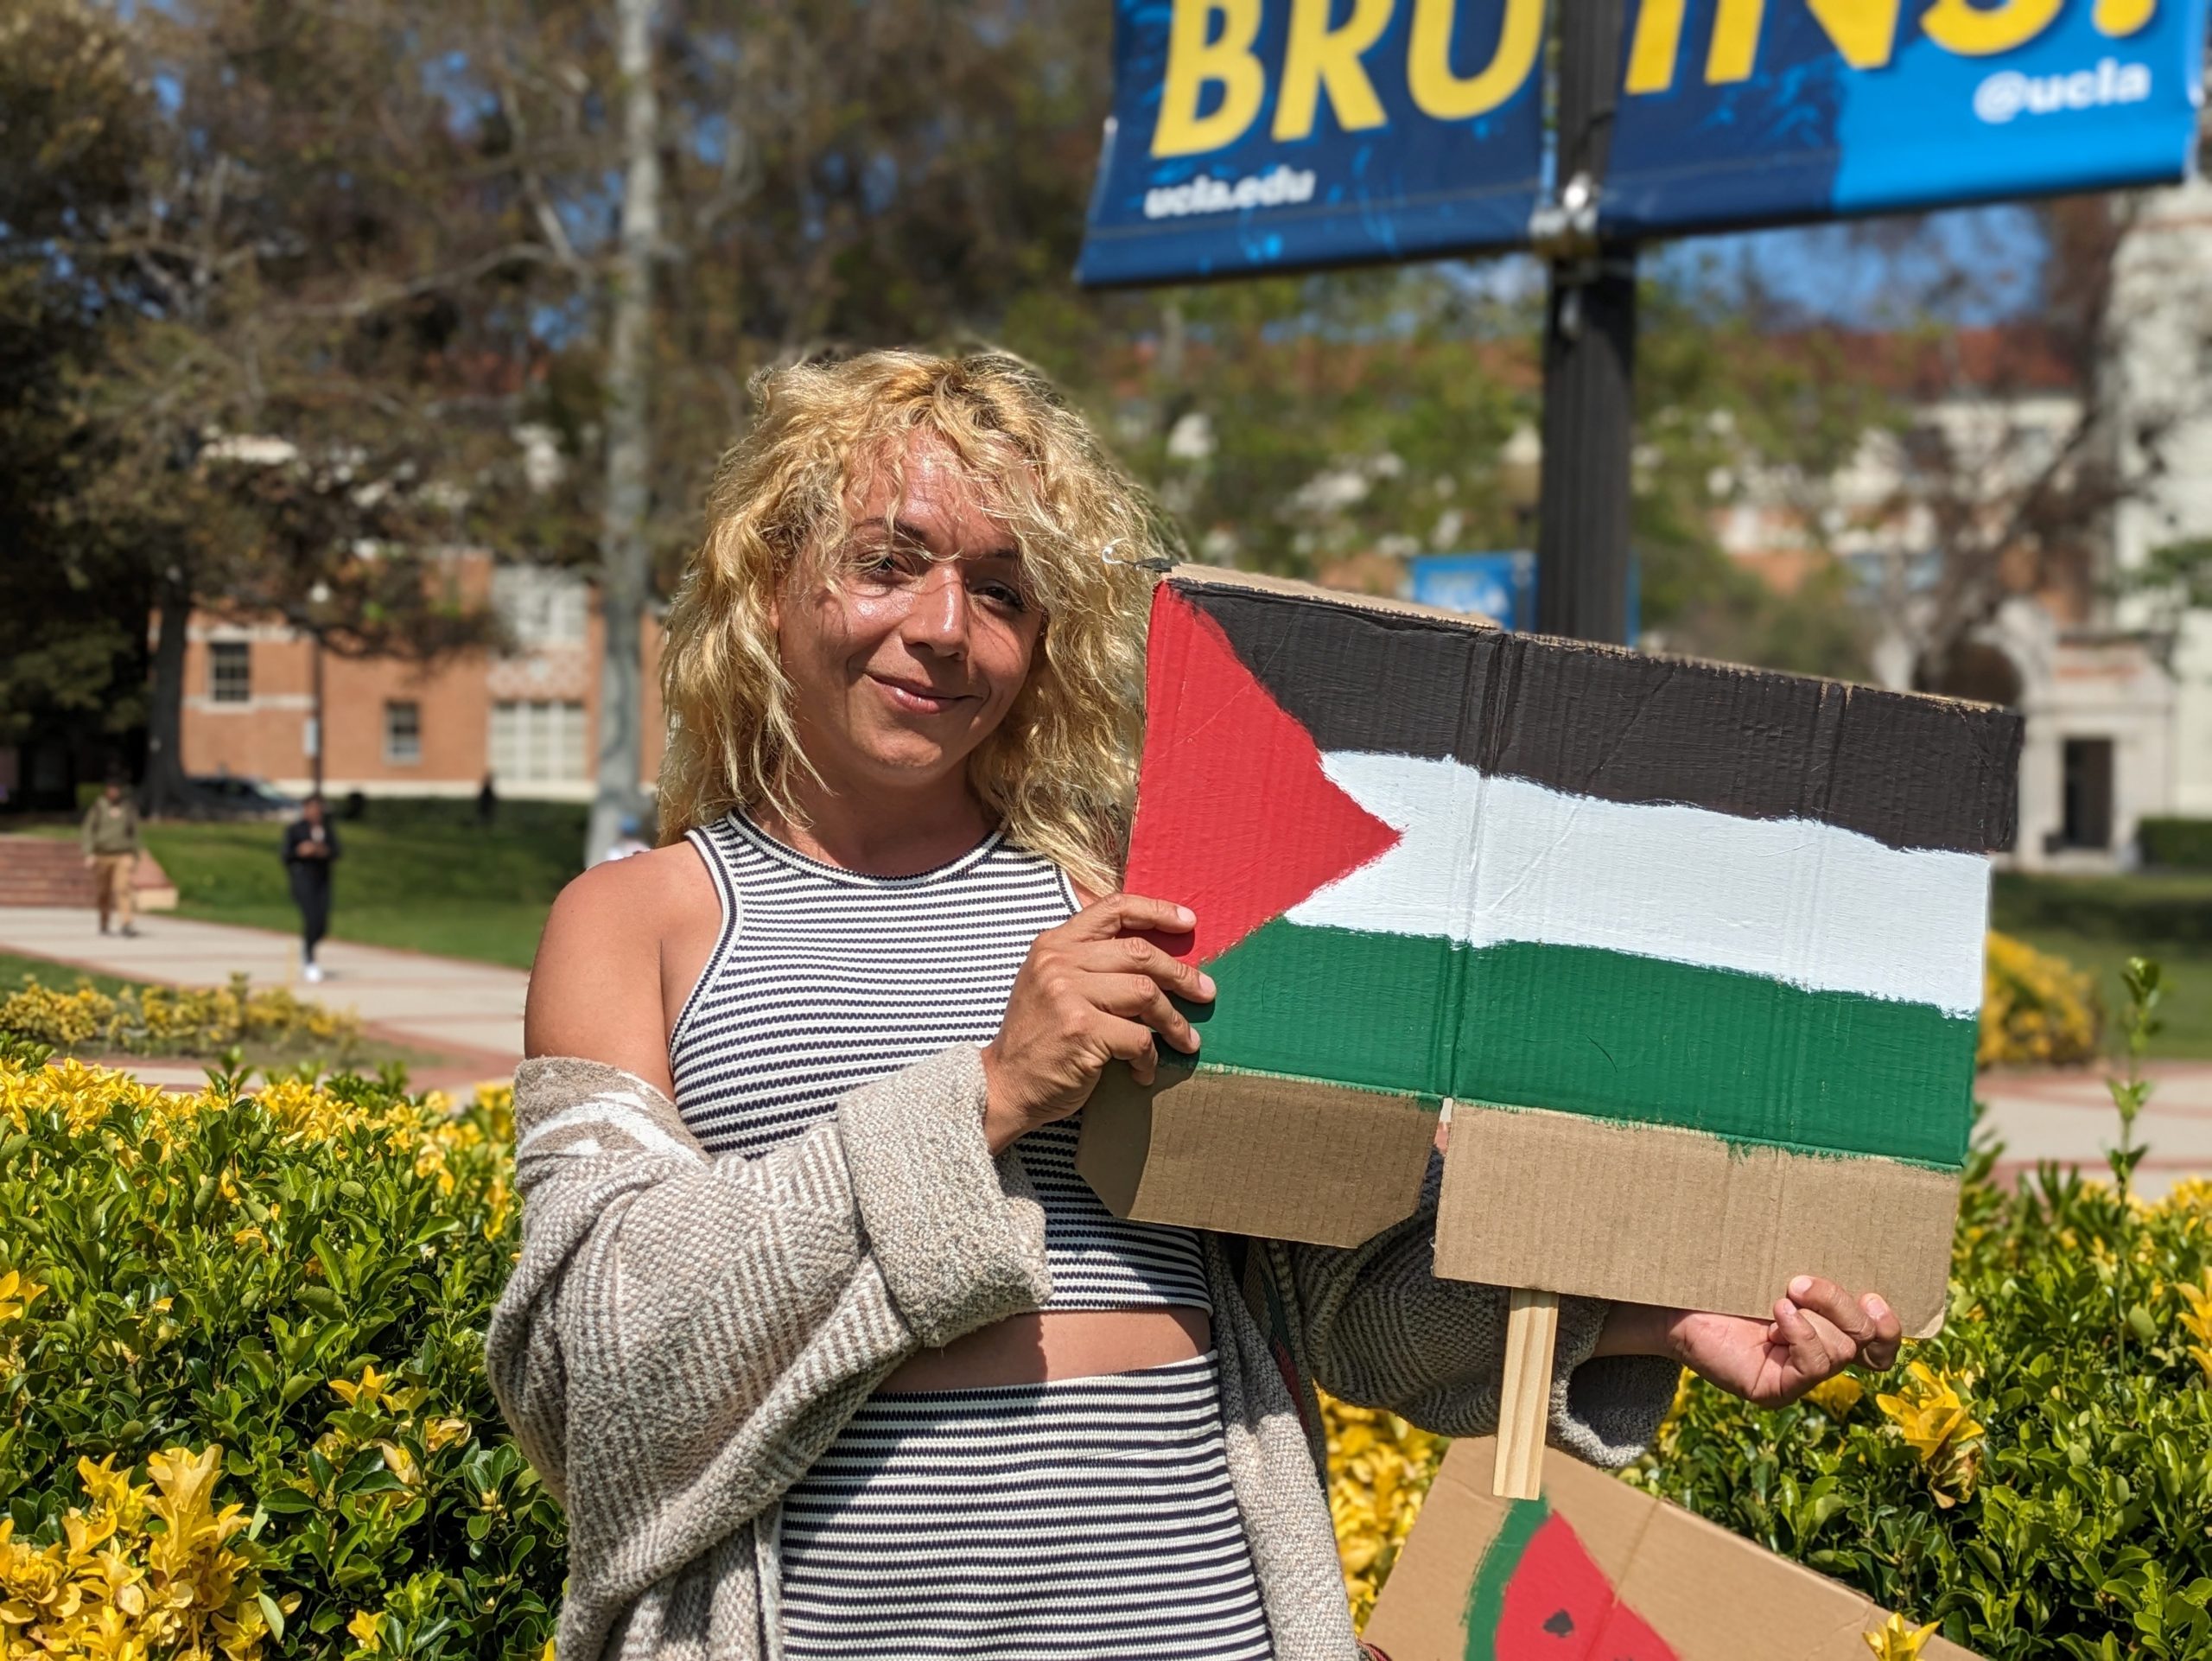 A photograph of Daniela Maldonado Salamanca, a Brown woman with wavy blonde hair, wearing a matching two-piece black-and-white striped tank top and skirt set. She smiles as she holds a cardboard sign with a painted Palestinian flag. Behind her is Dickson Court and a Bruins sign hanging on a lamppost.